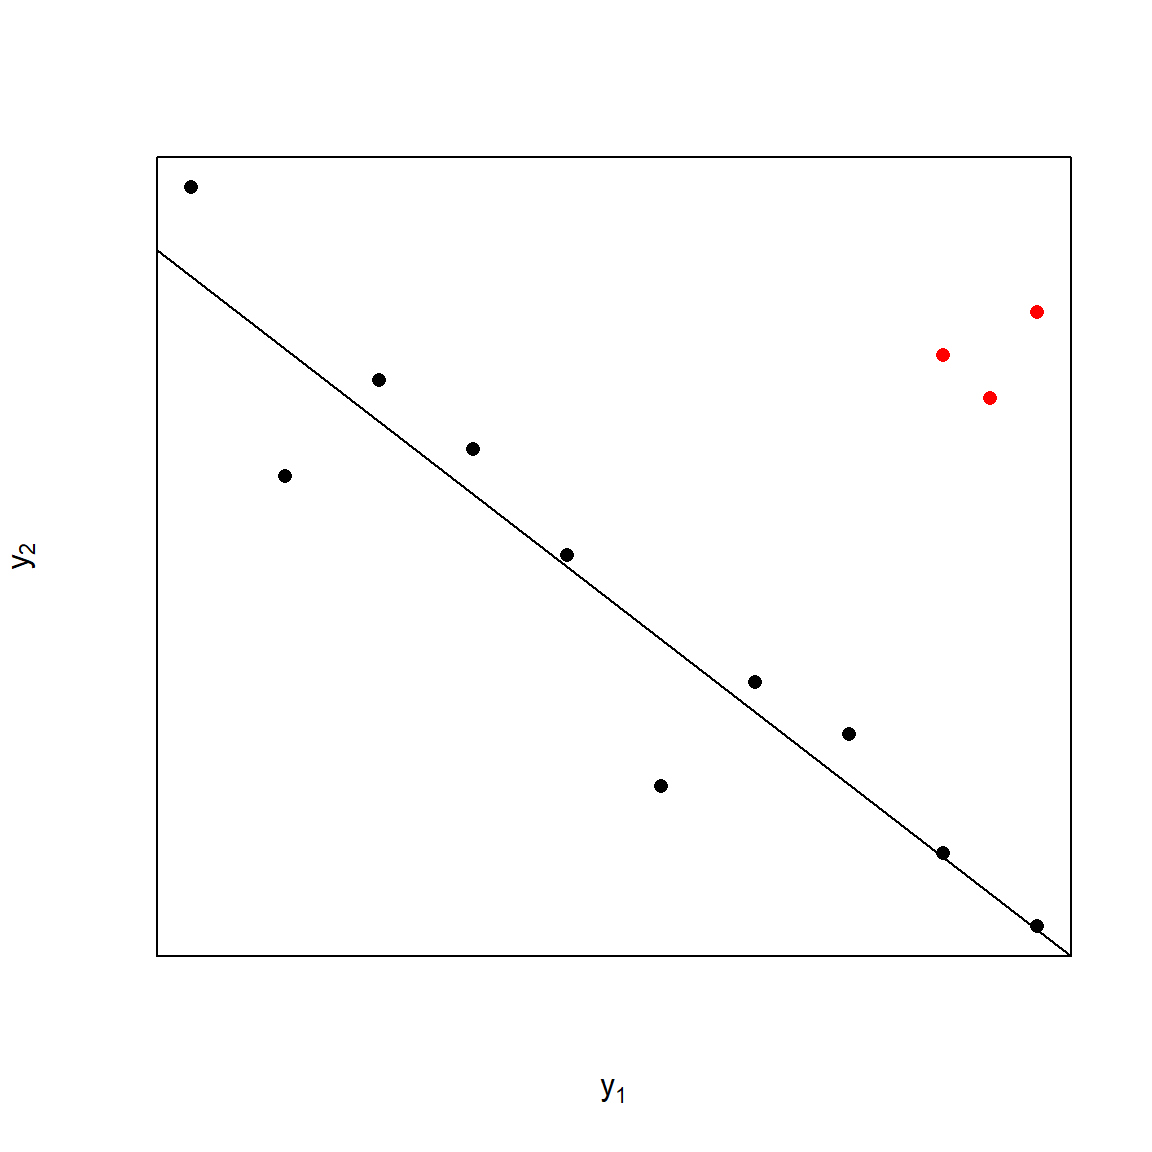 Joint distribution $y_{1},y_{2}$ with promising "outliers" labelled red given goal $\max_{X}[y_{1}=f_{1}(X),y_{2}=f_{2}(X)]$.